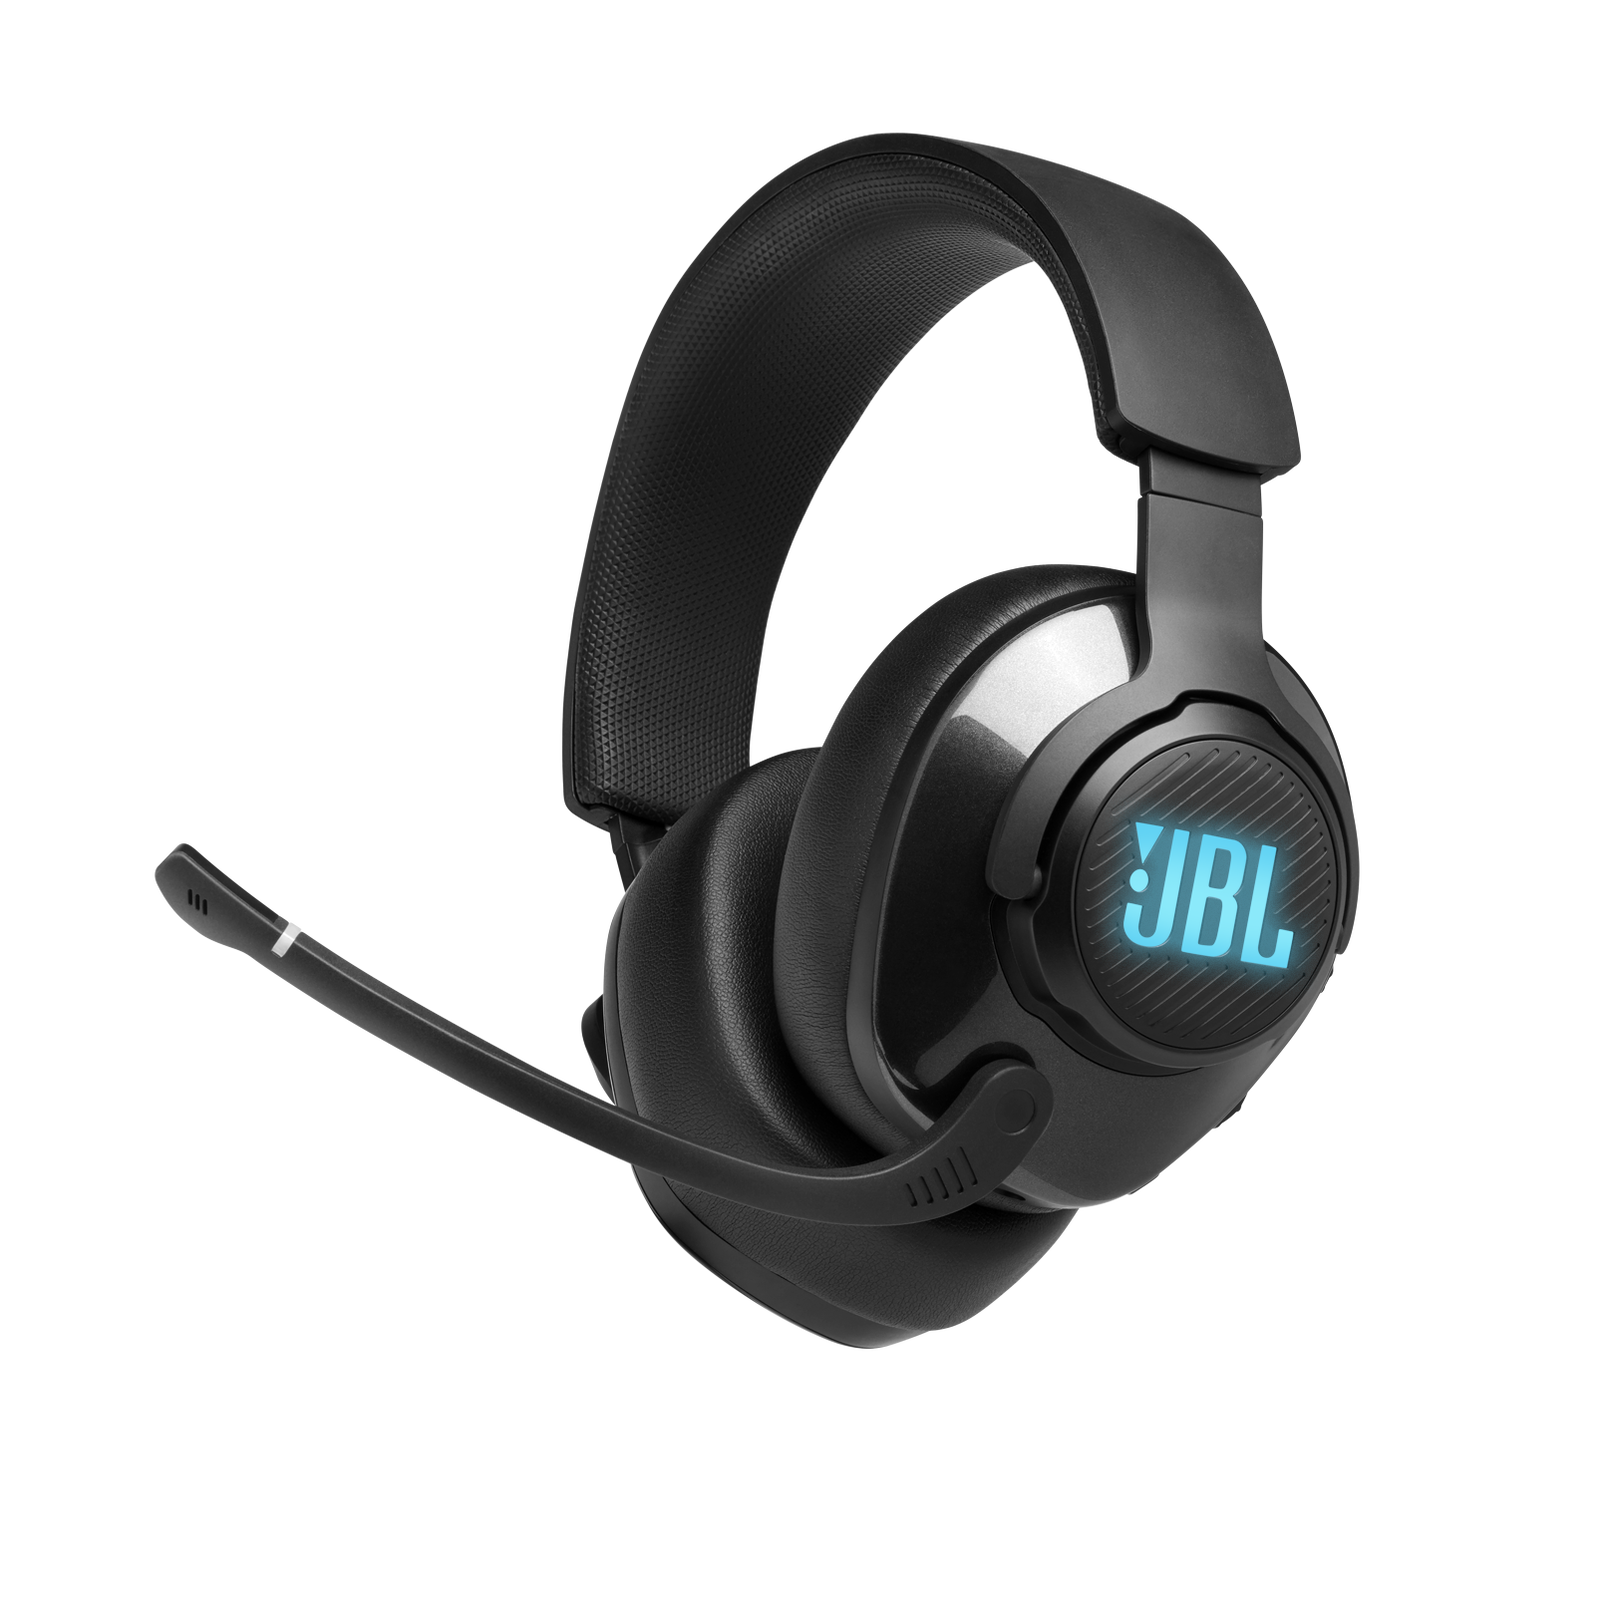 JBL Quantum 400 | Over-Ear Wired Gaming Headset - JBL 7.1 Surround Sound & Mic Noise Cancelling - PS4/XBOX/Switch/PC Compatible Gaming